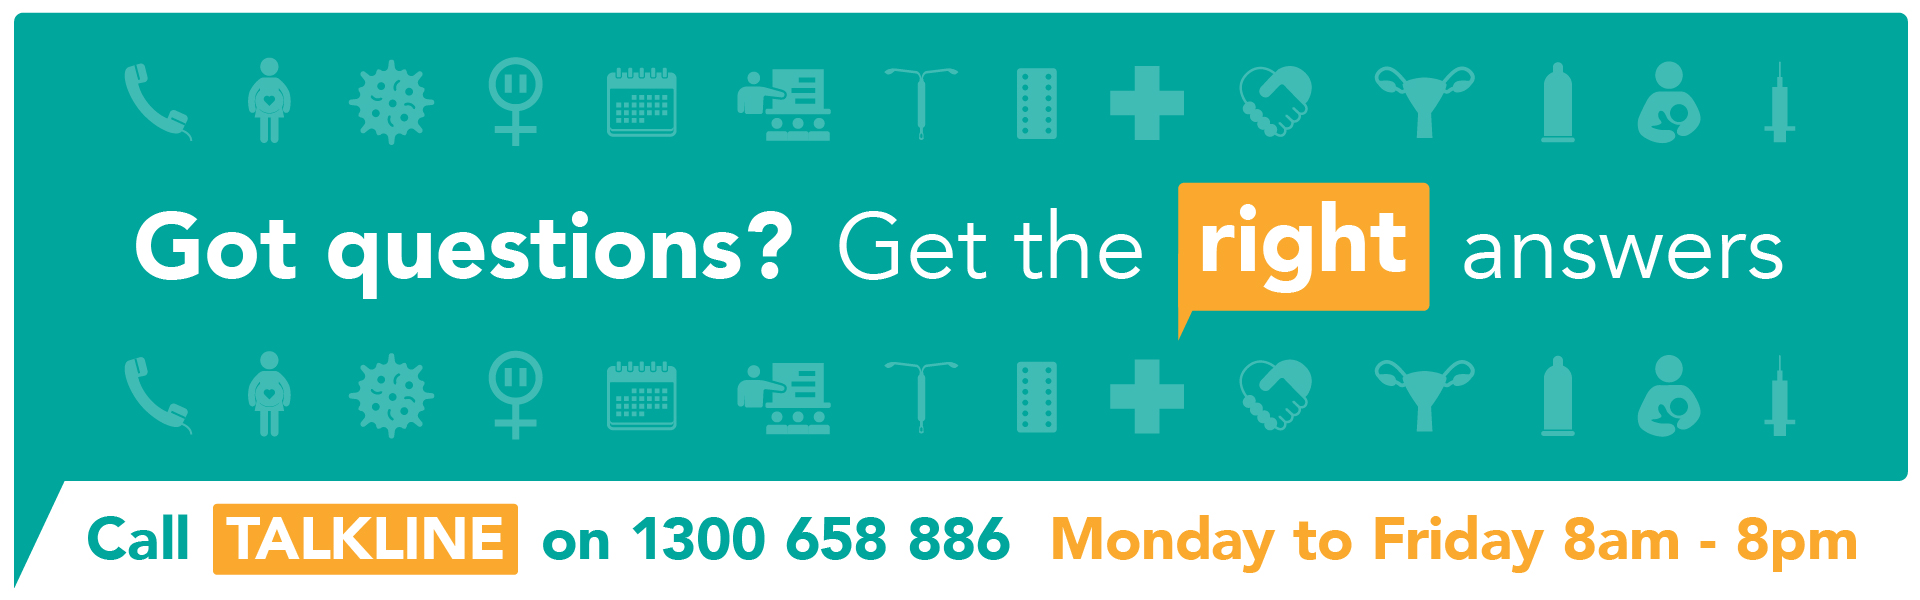 Got questions? Get the right answers. Call Family Planning Australia’s TALKLINE 1300 658 886